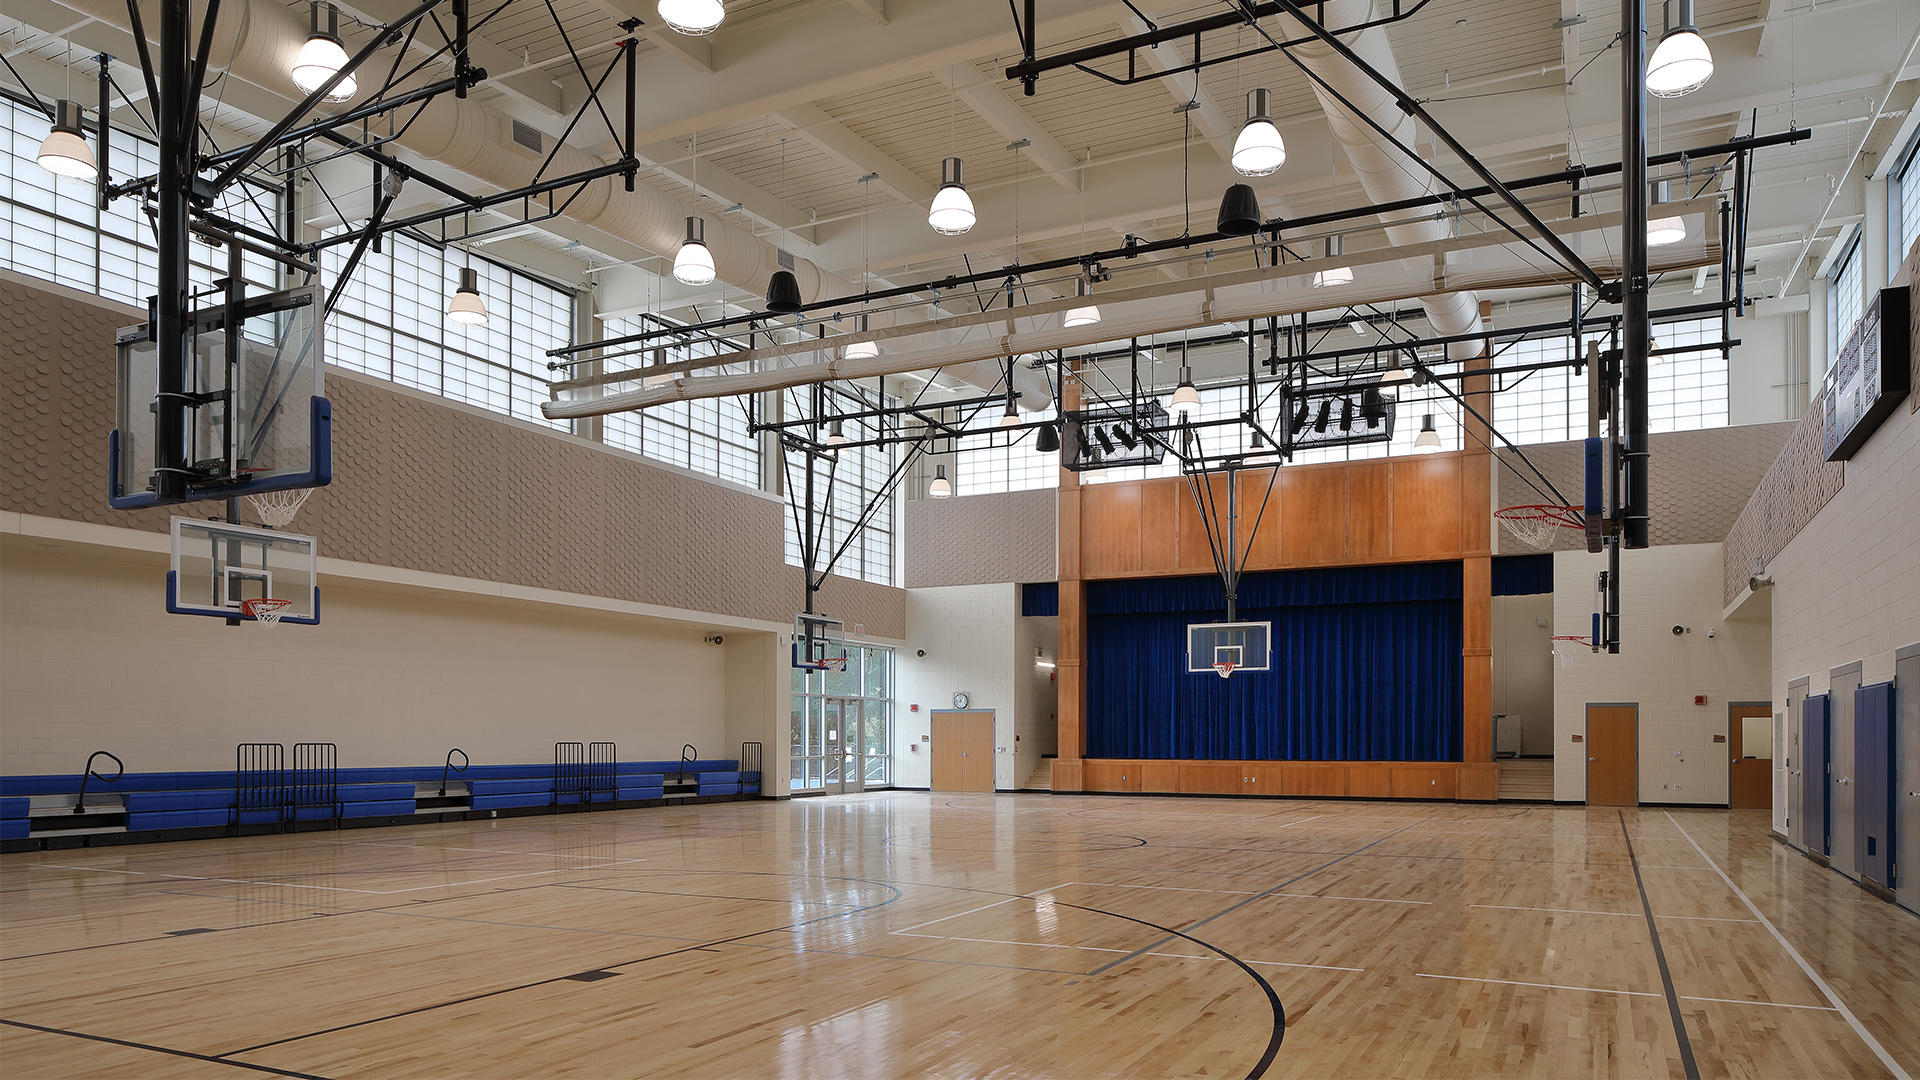 2_Gymnasium_SCHRADERGROUP_Learning-By-Design-Fall-2021-Outstanding Project-Enfield-ELC-SDST